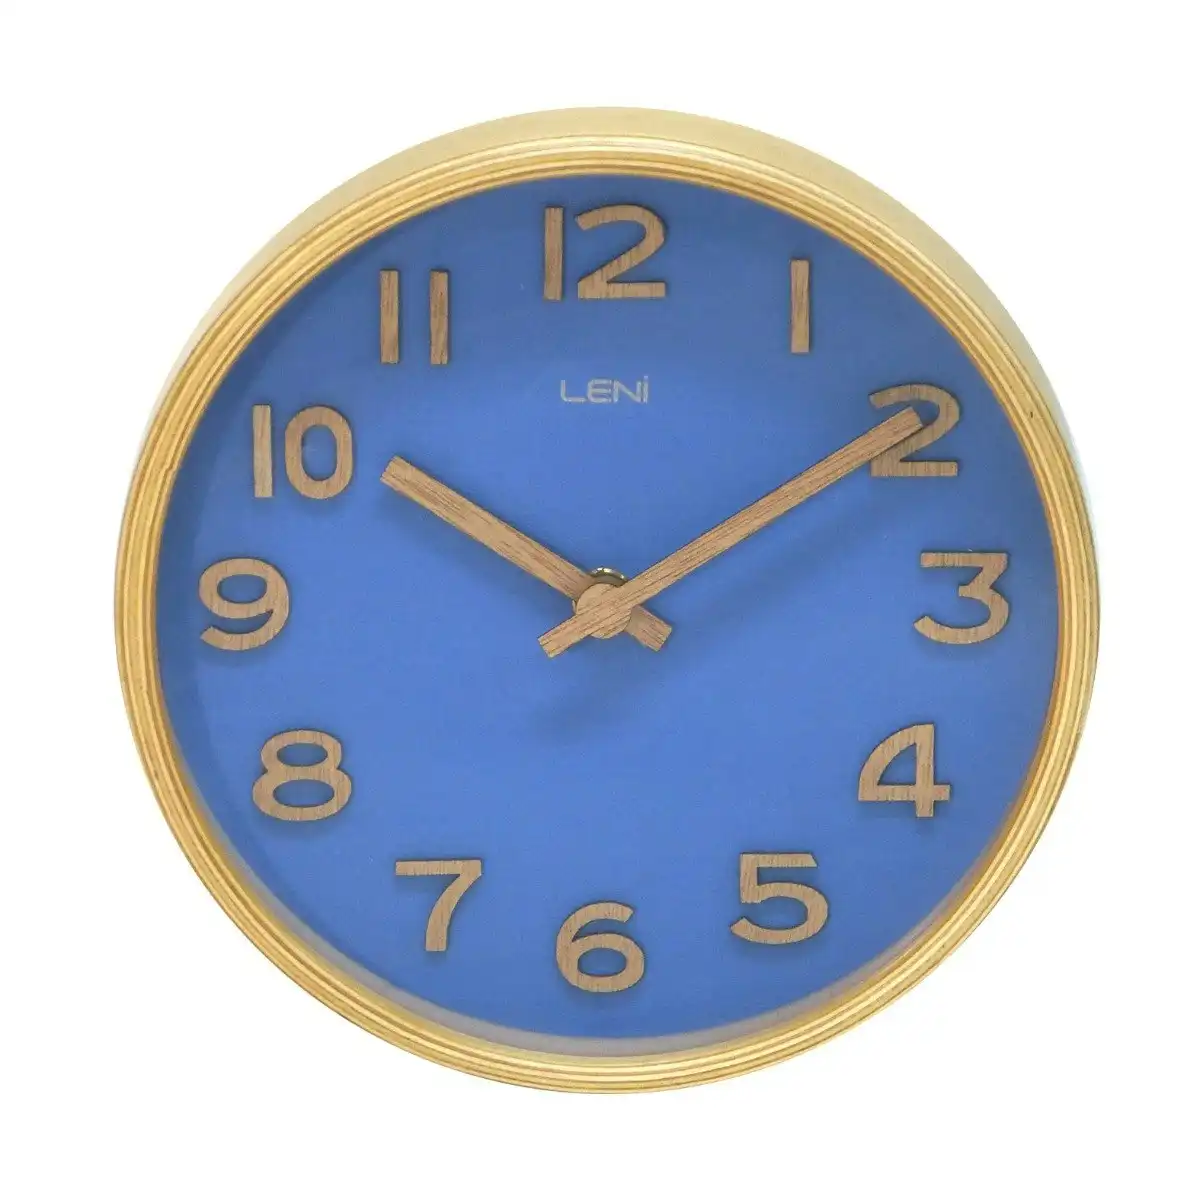 Leni Wooden 18cm Analogue Table/Desk Hanging Wall Clock Home/Office Decor Navy